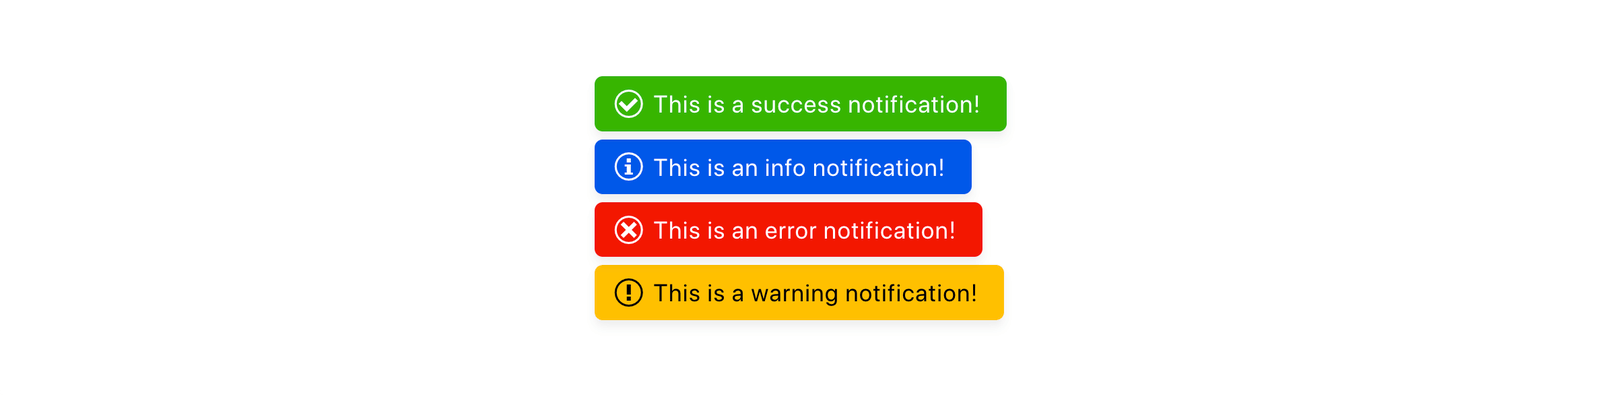 4 toast notification examples: green one with checkmark for success, blue with i icon for info notification, red with an x symbol for error notification, and yellow with exclamation point for warning